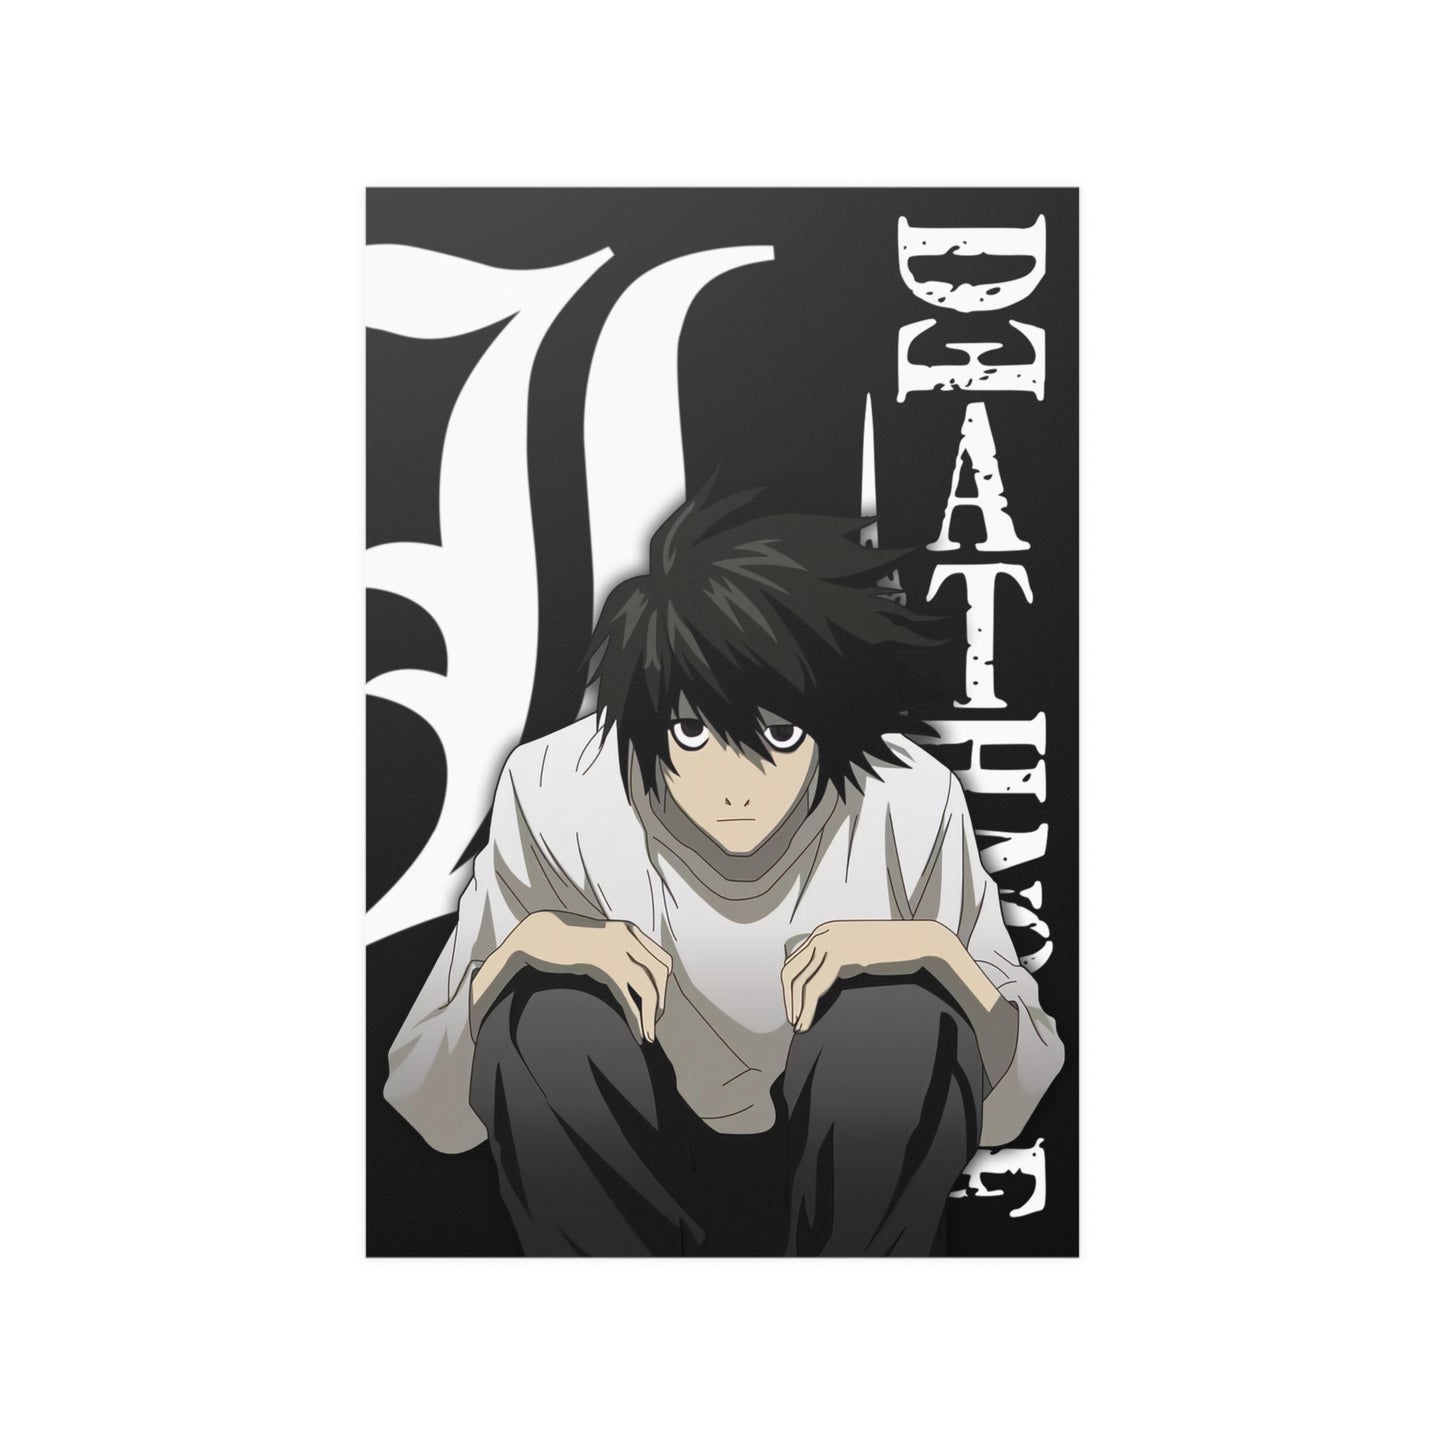 L Death Note Poster.